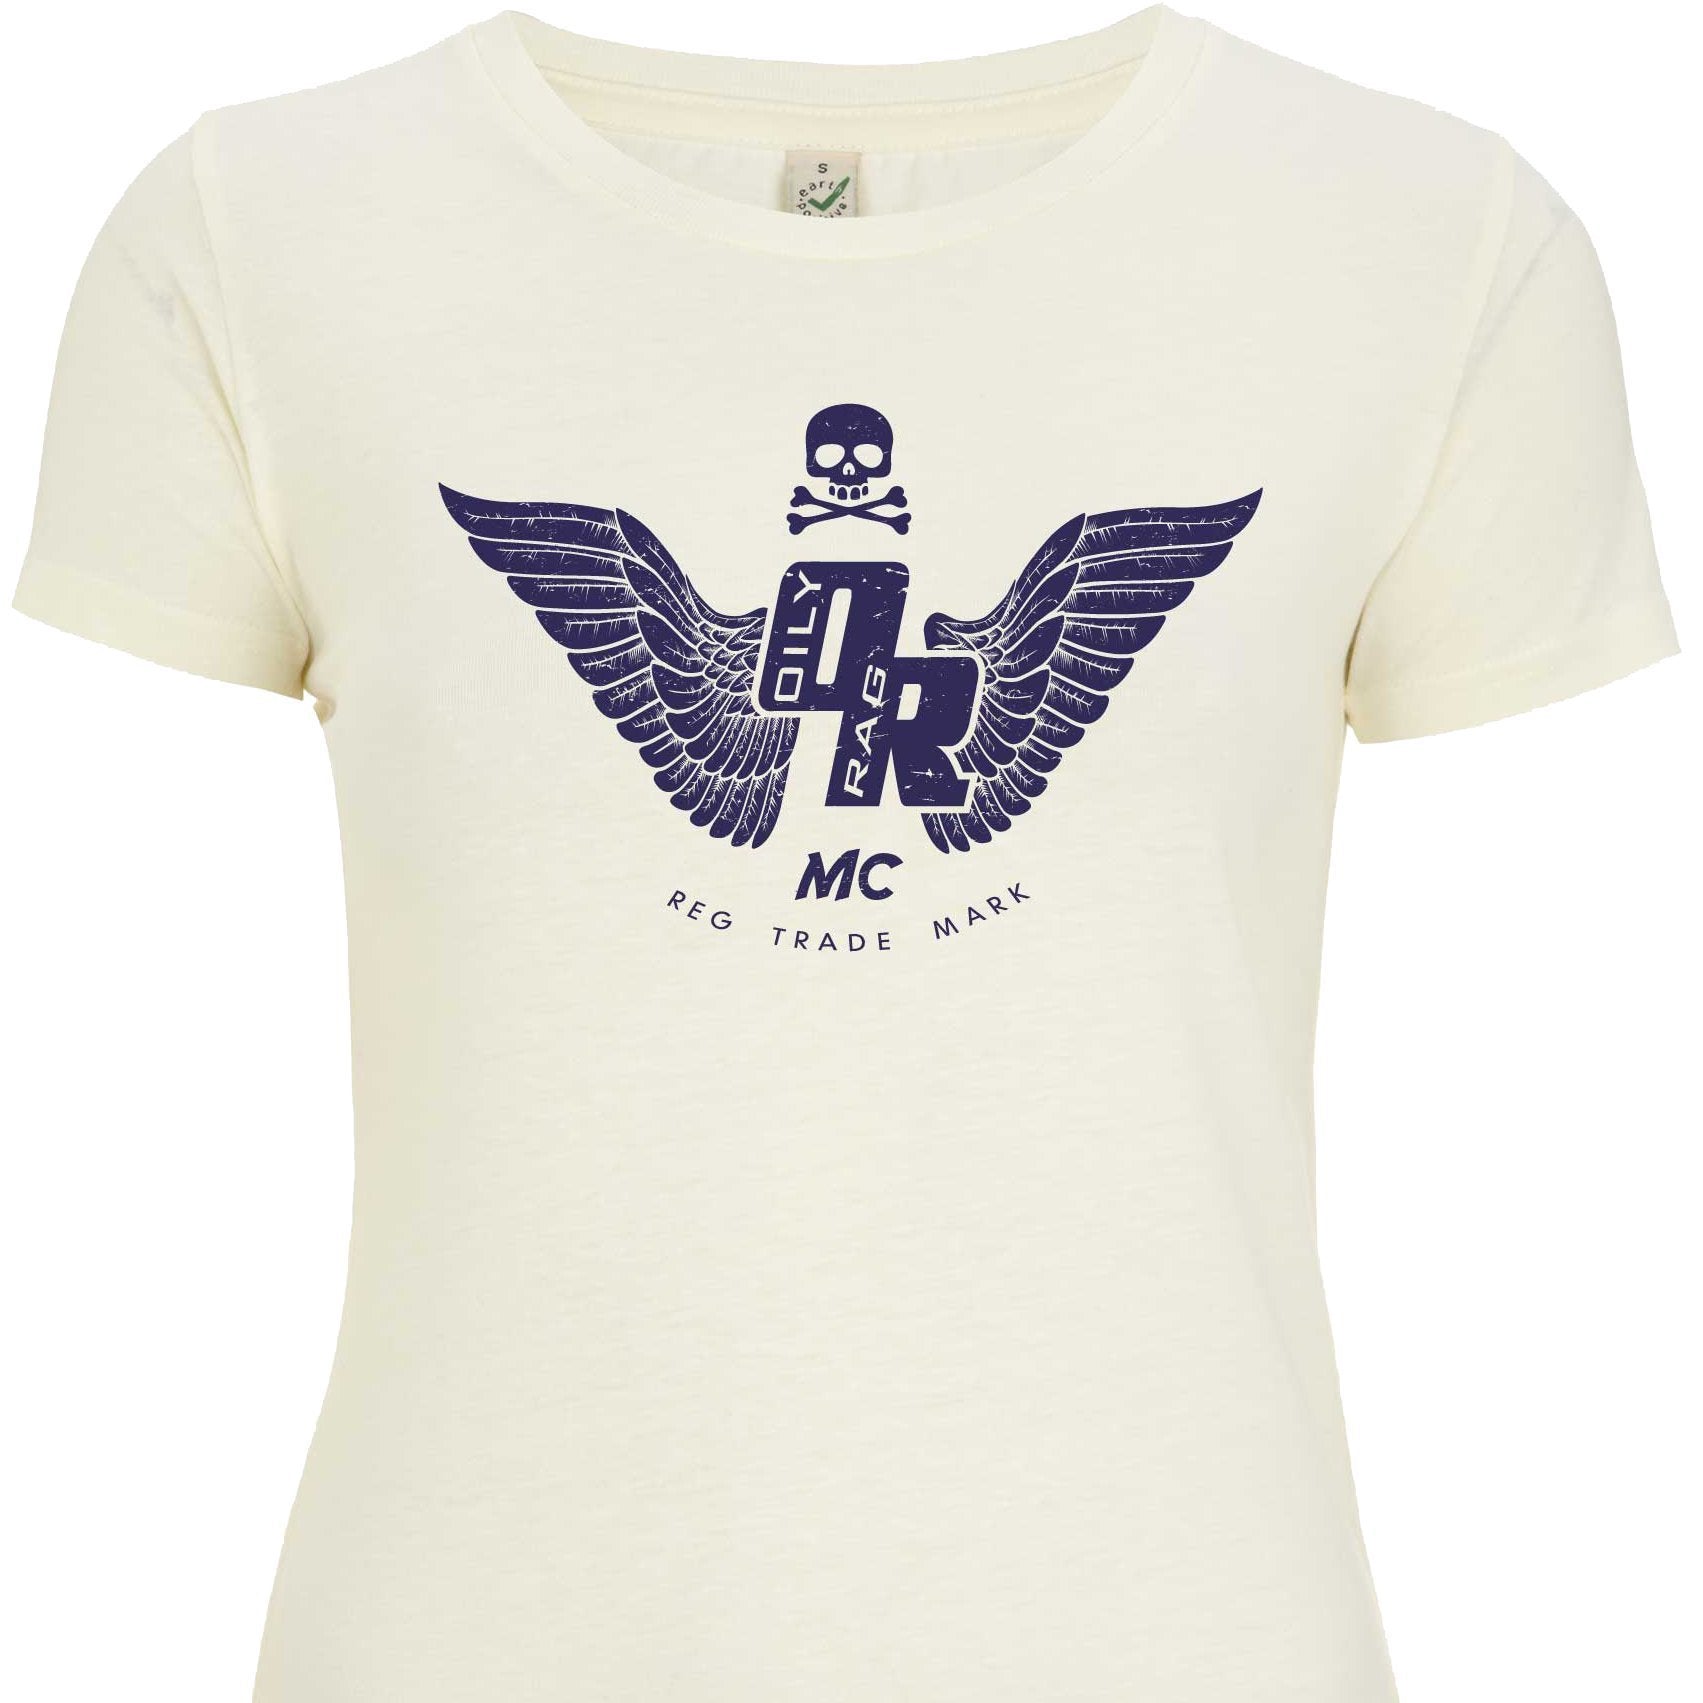 Oily Rag Clothing - Oily Rag Clothing Ladies Motorcycle Club T'Shirt in Linen - T-Shirts - Salt Flats Clothing